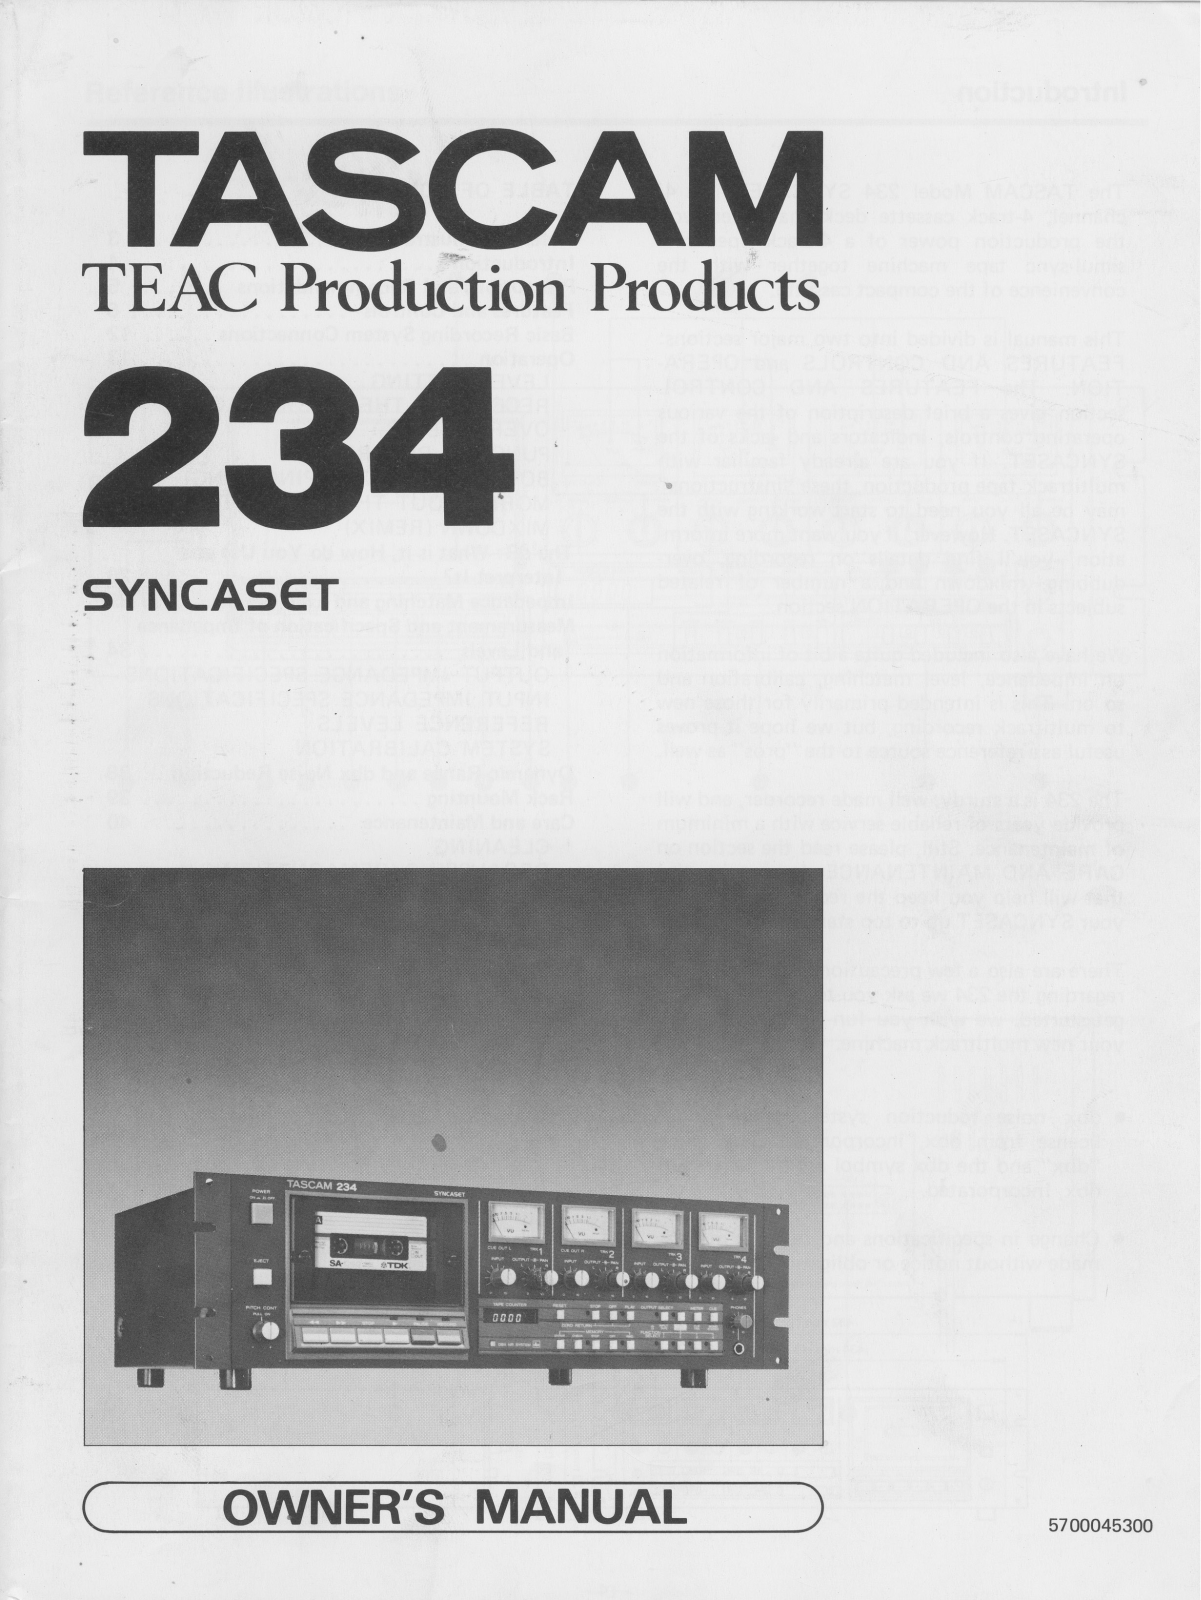 Tascam 234 Owners Manual